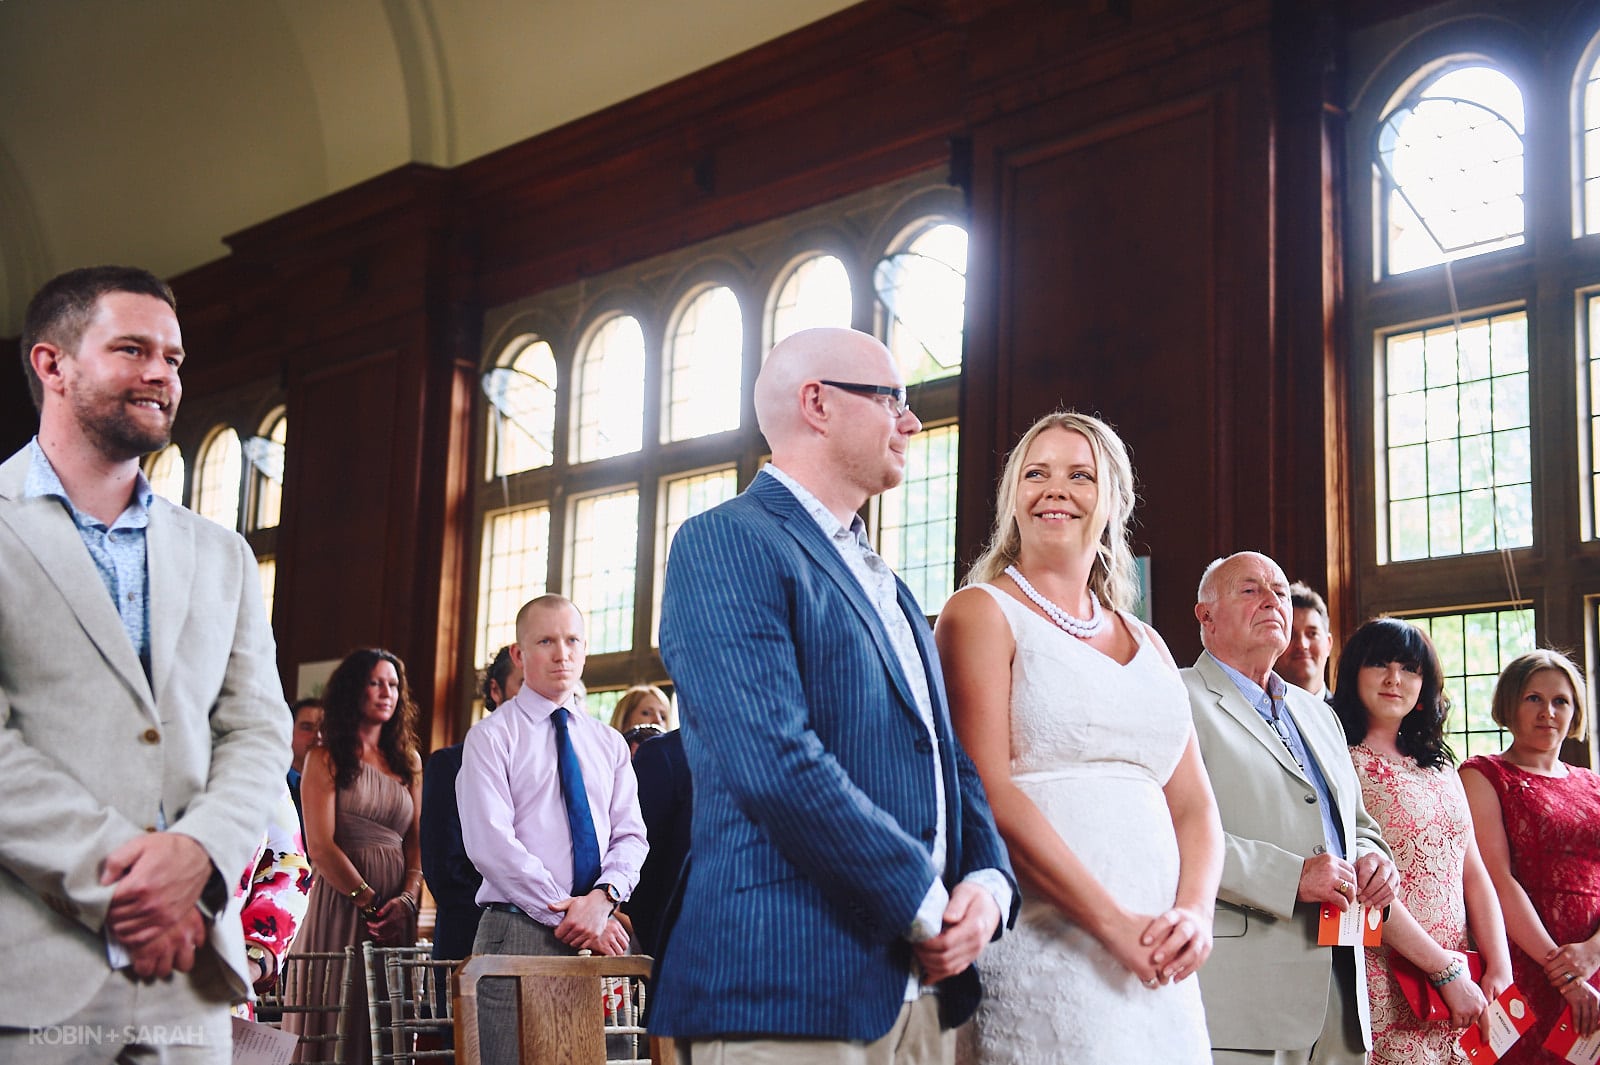 Bride and groom smile at each other during wedding ceremony in Malvern College Memorial Library